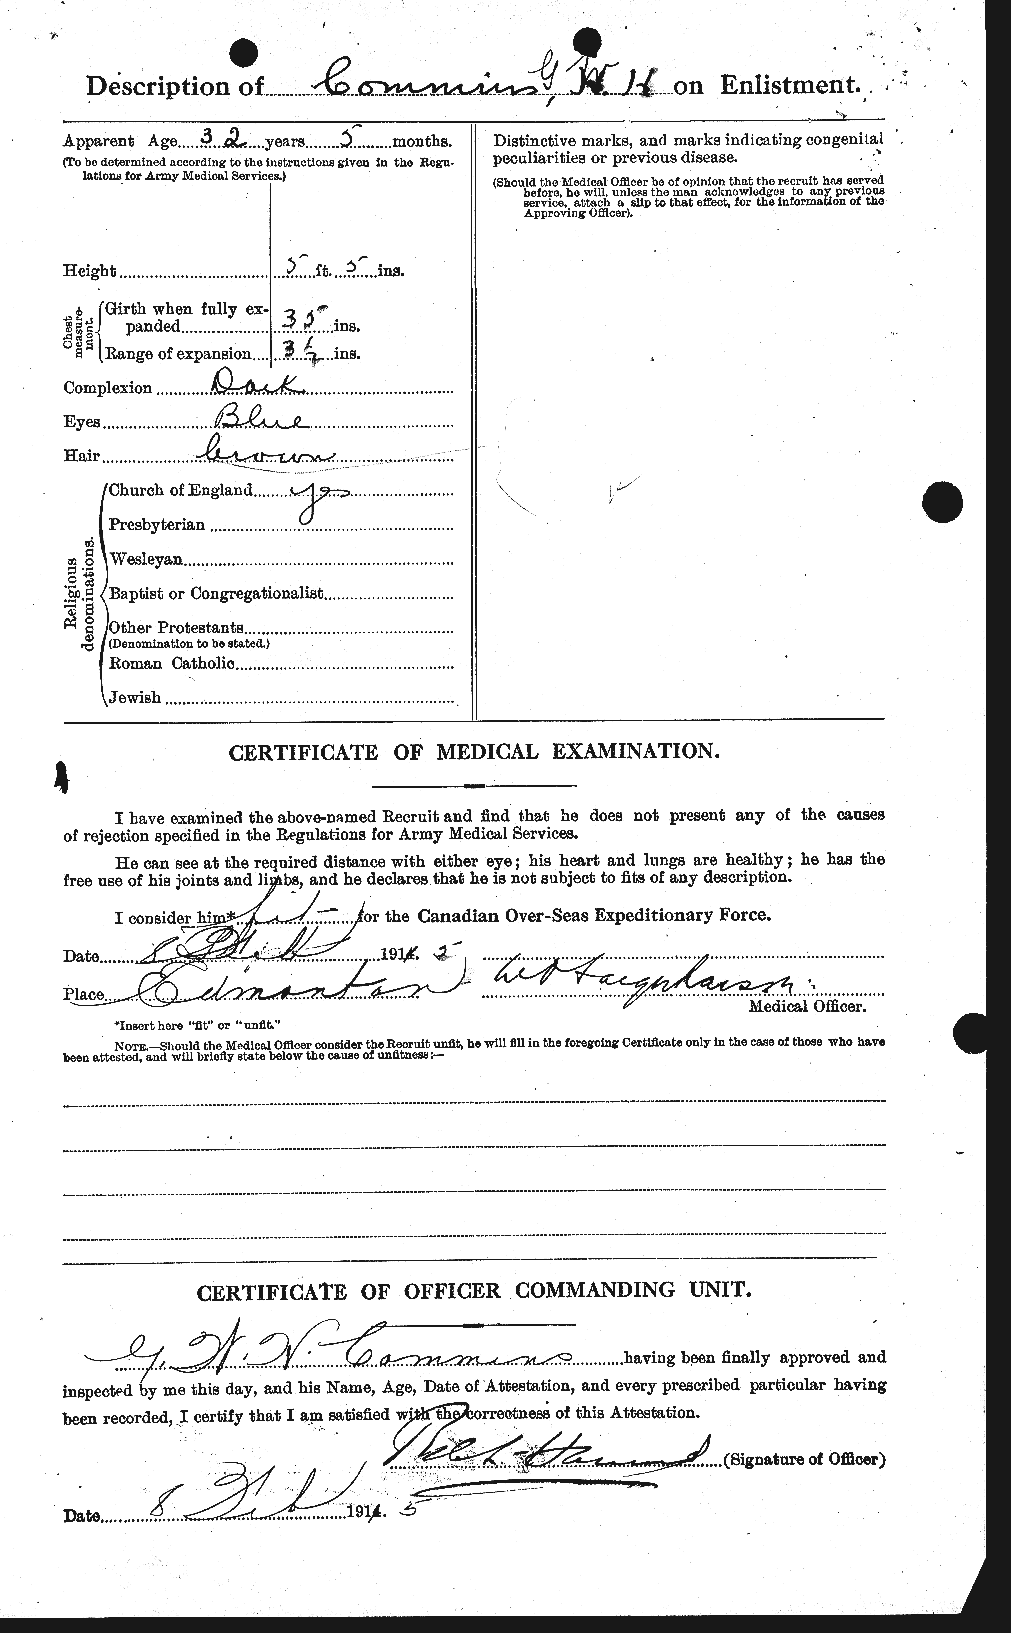 Personnel Records of the First World War - CEF 068737b